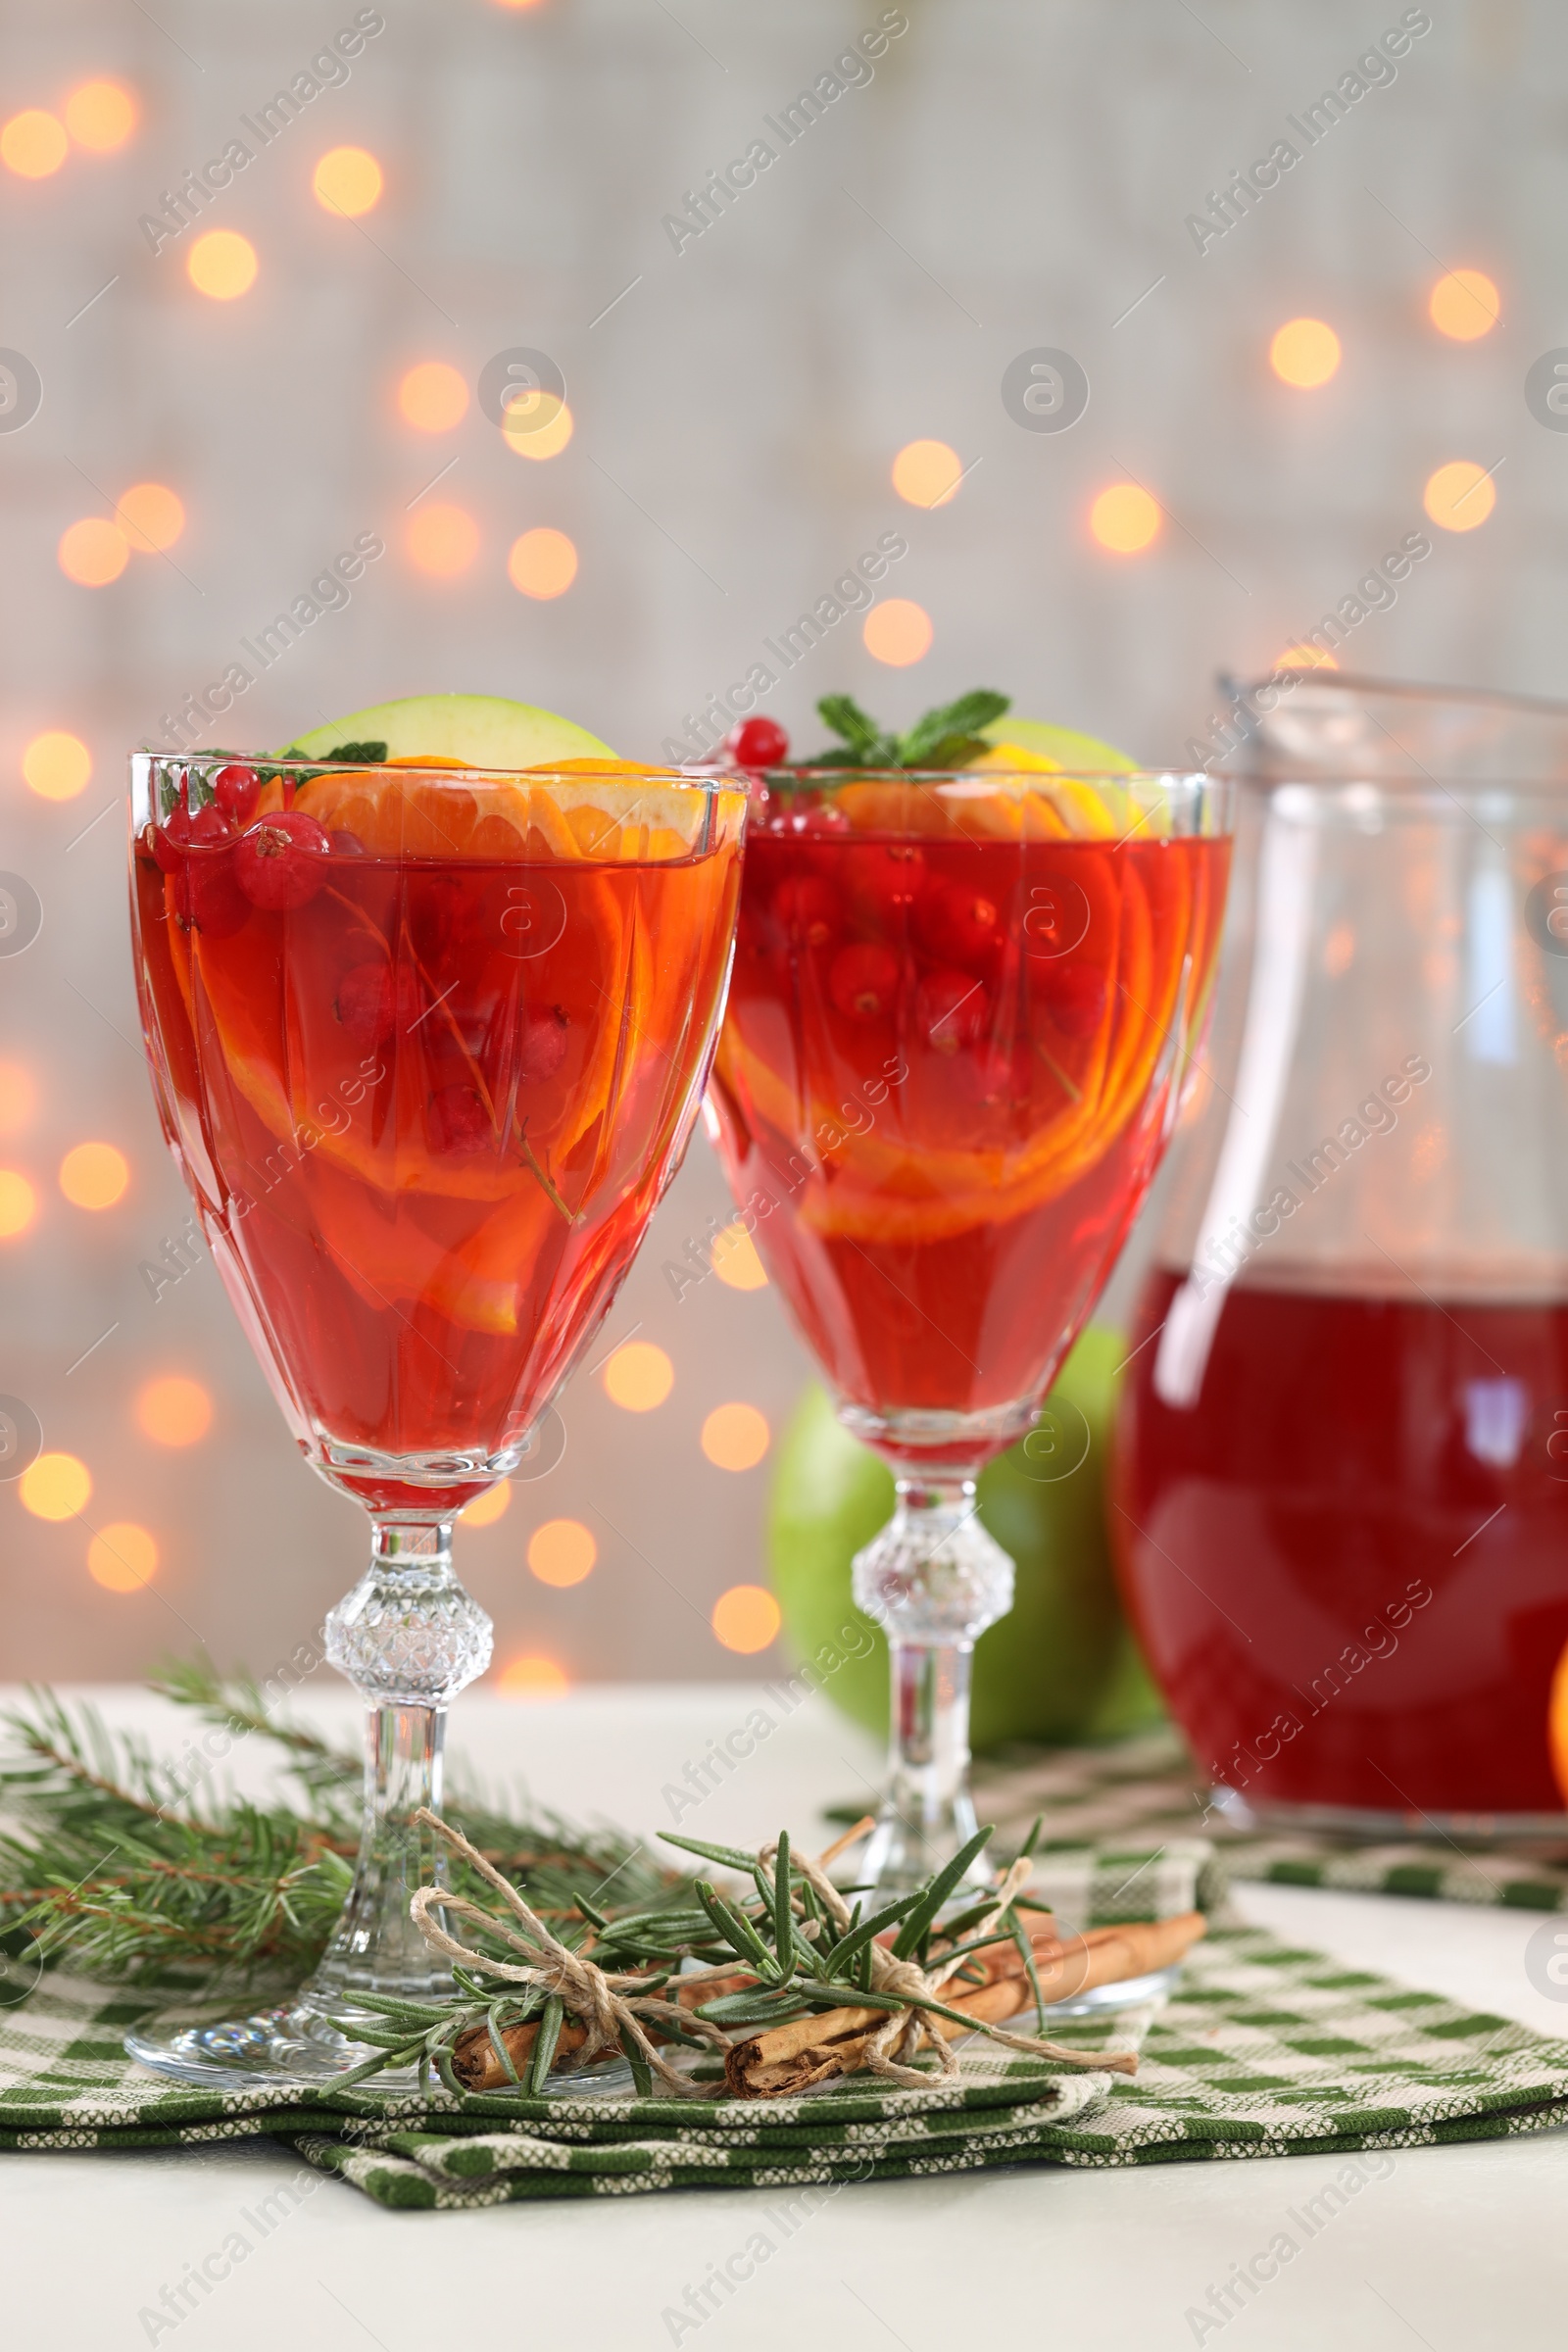 Photo of Christmas Sangria cocktail in glasses, cinnamon sticks and fir tree branch on white table against blurred lights